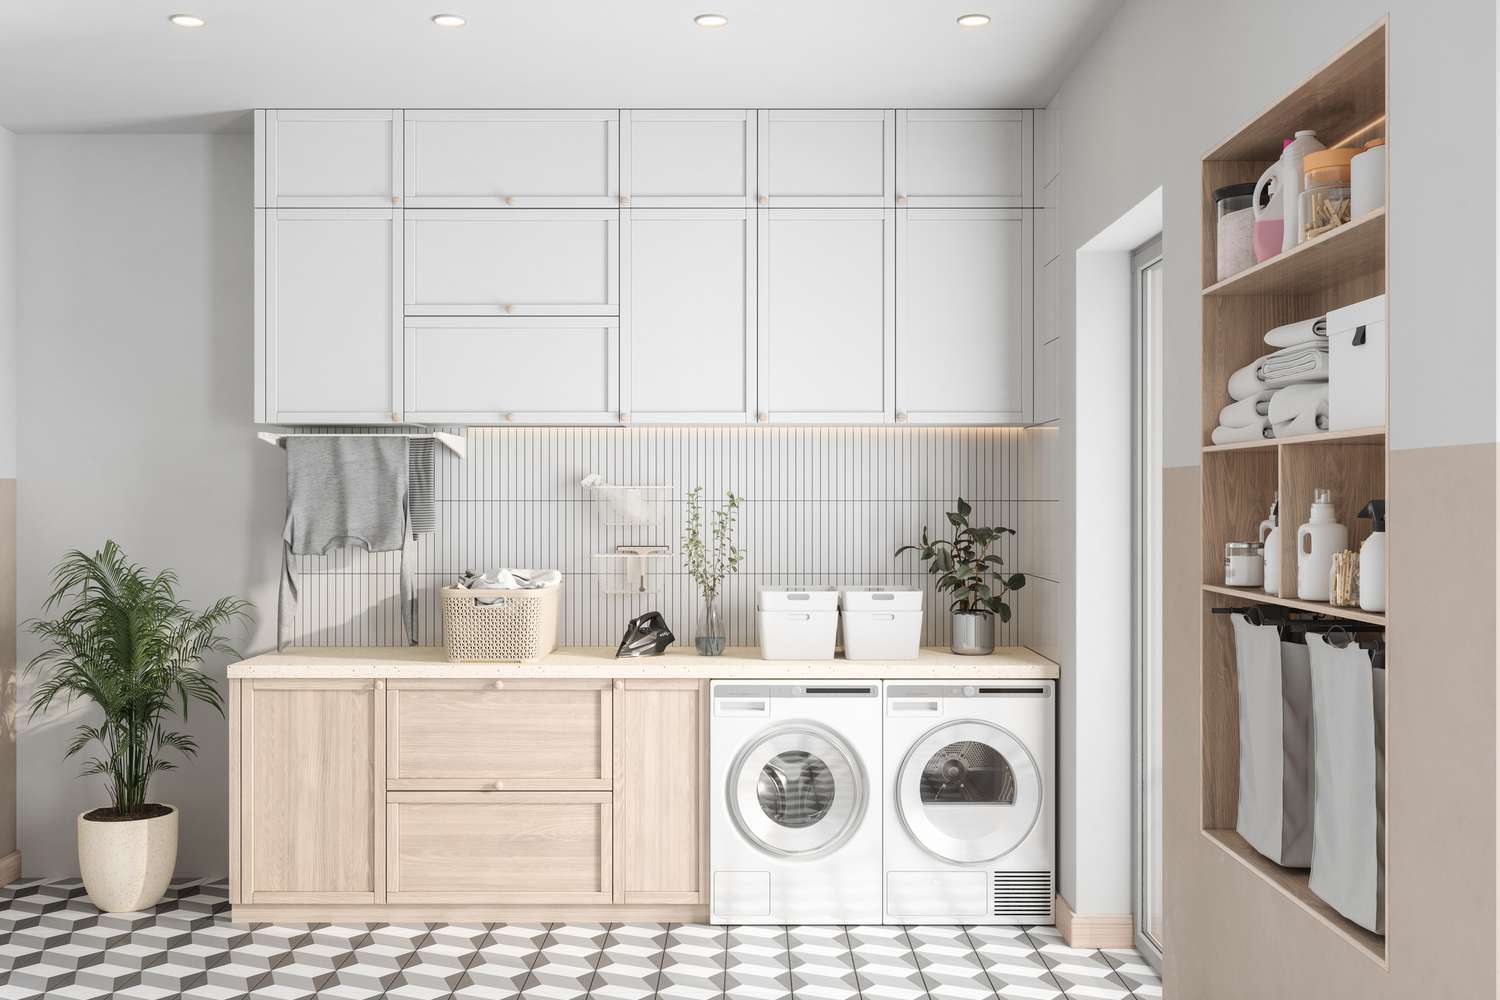 9 Laundry Room Cabinet Ideas: Tips For An Organized Space